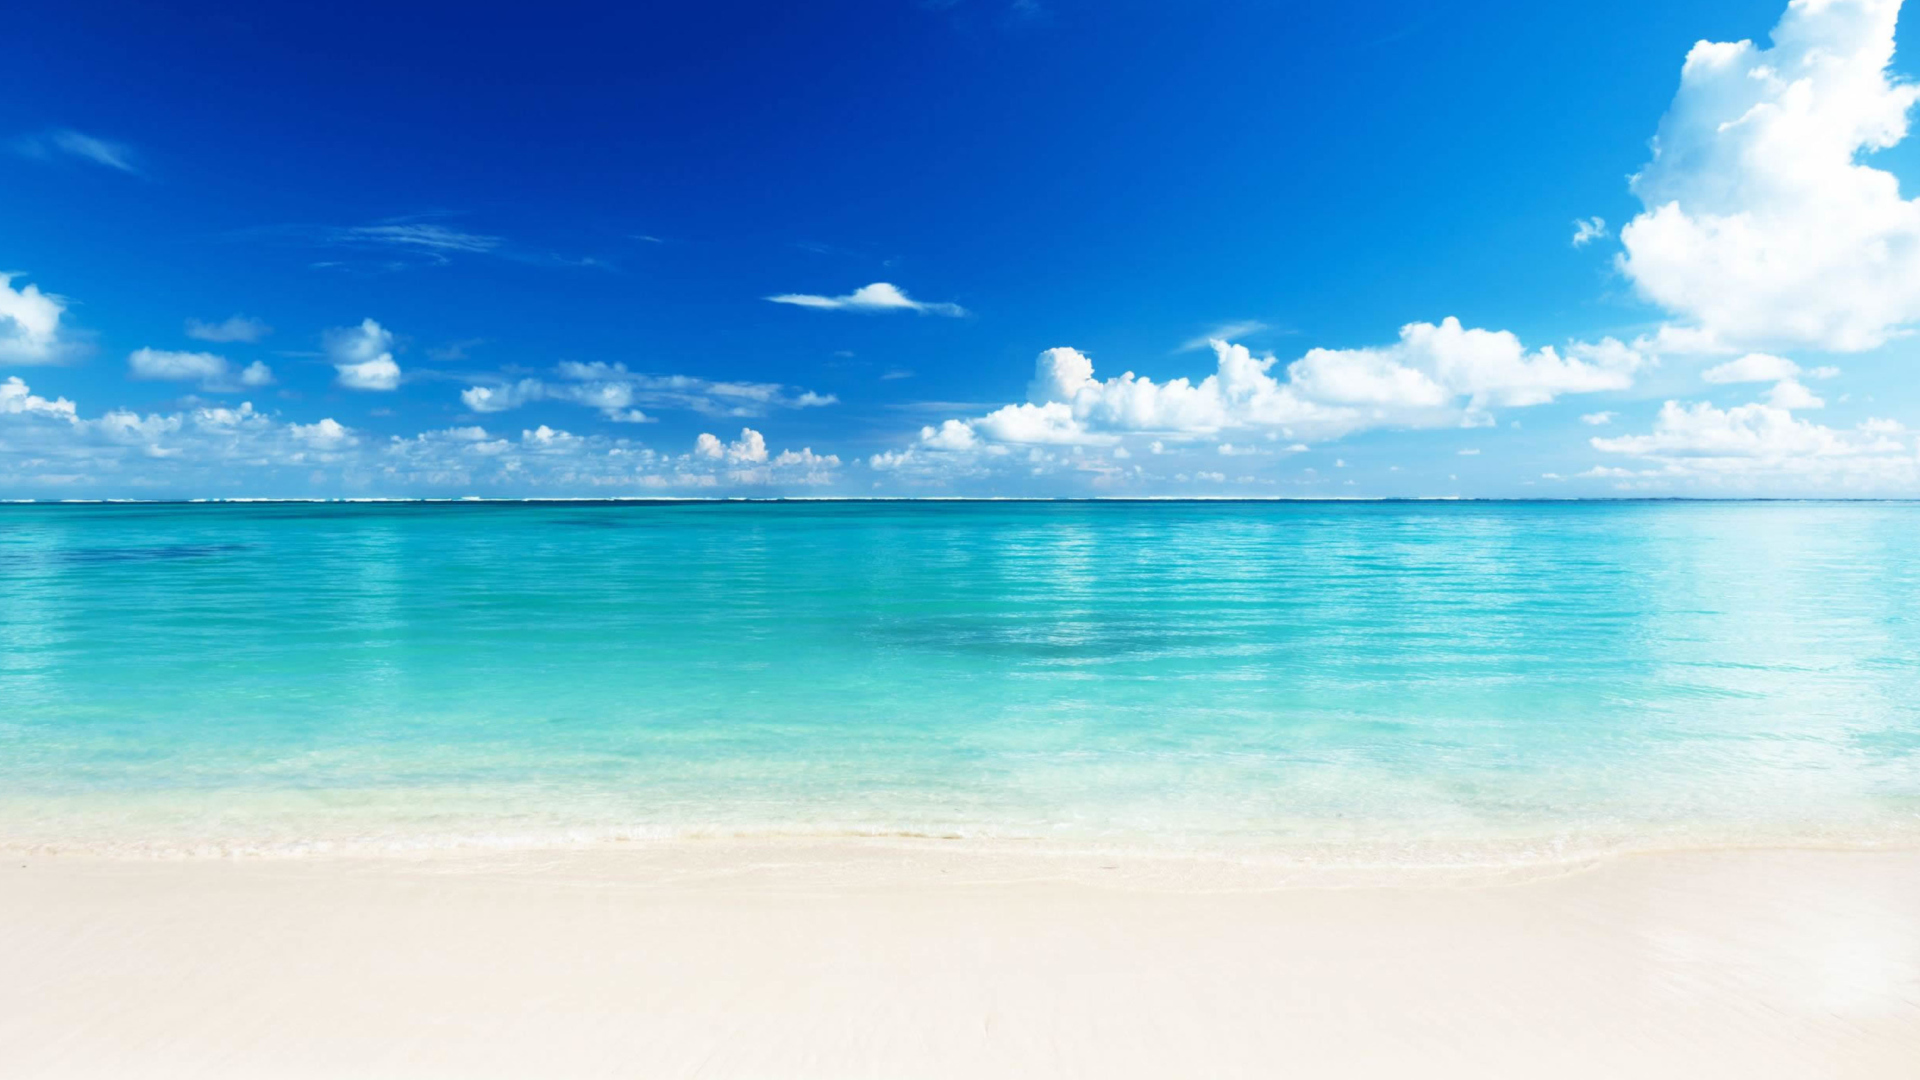 Turquoise Water Beach Wallpaper For 1920x1080